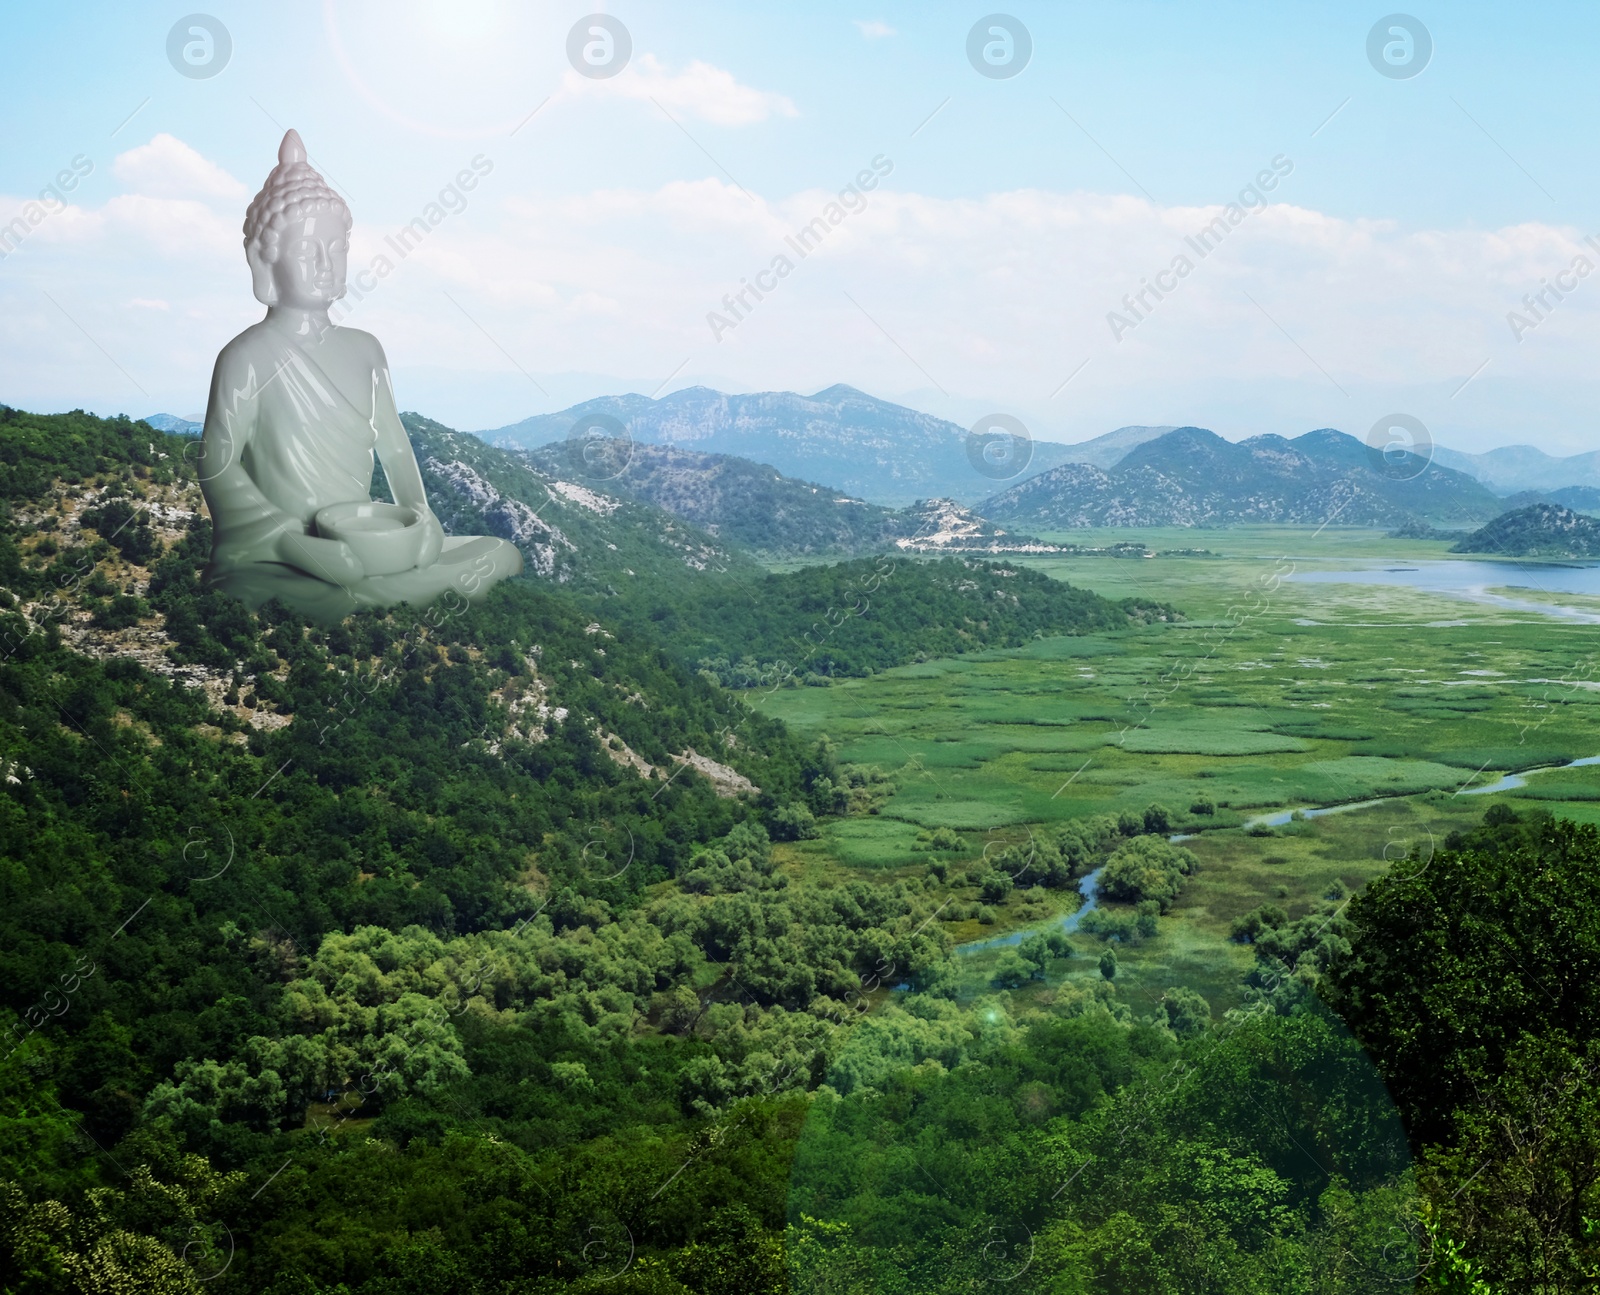 Image of Majestic Buddha sculpture rising above picturesque mountains on sunny day 